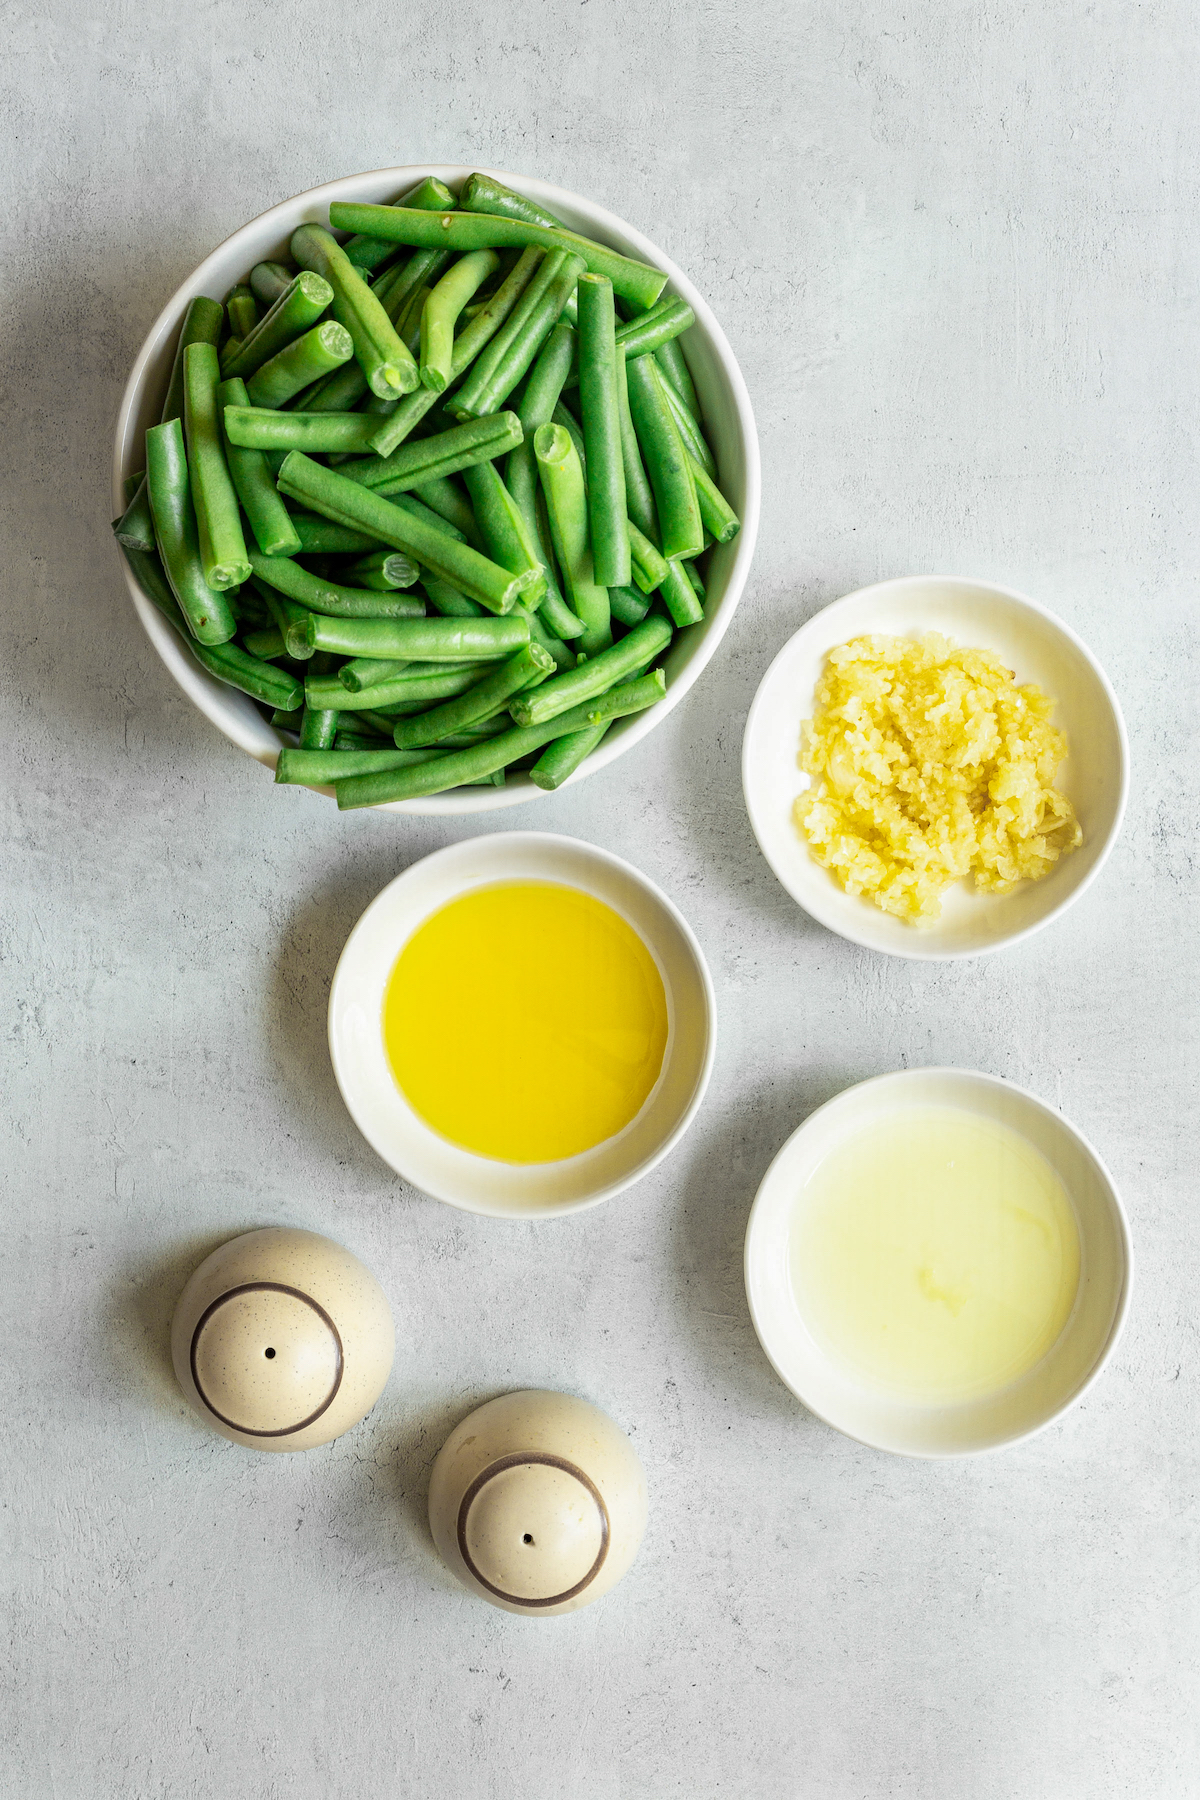 From top: Fresh green beans, minced garlic, lemon juice, salt, pepper, and olive oil.